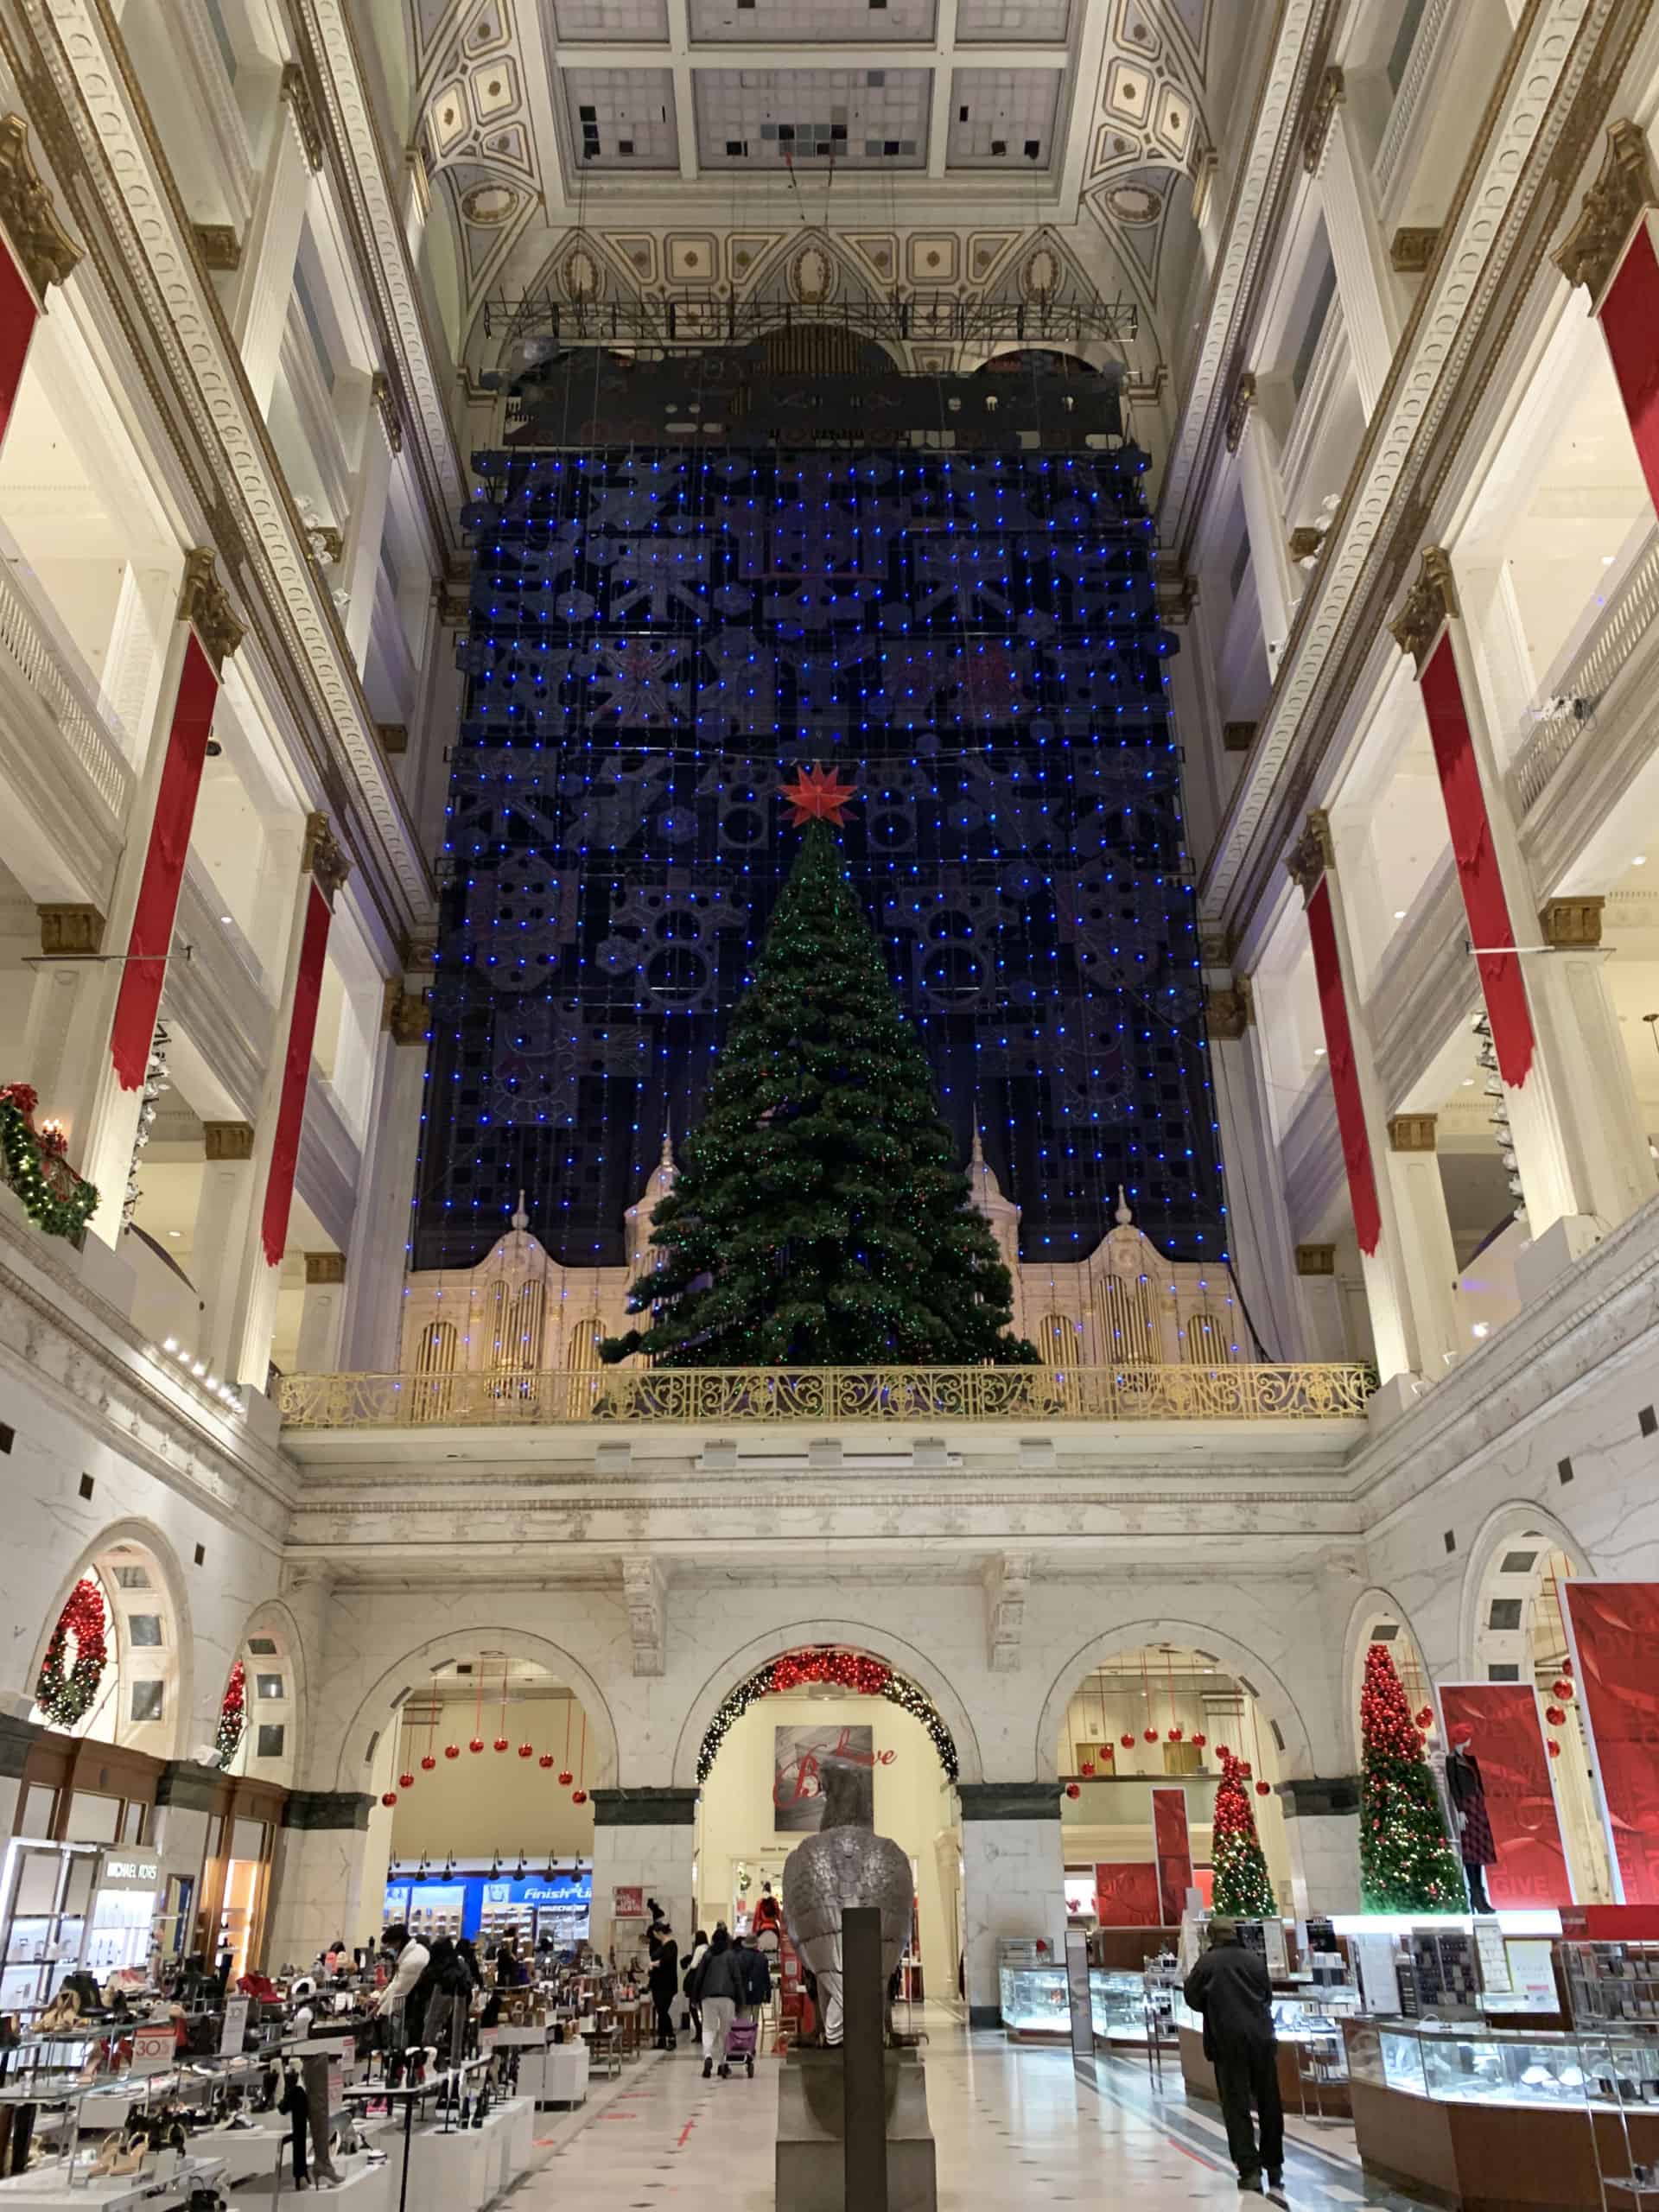 Background Lighting Display at Macy’s